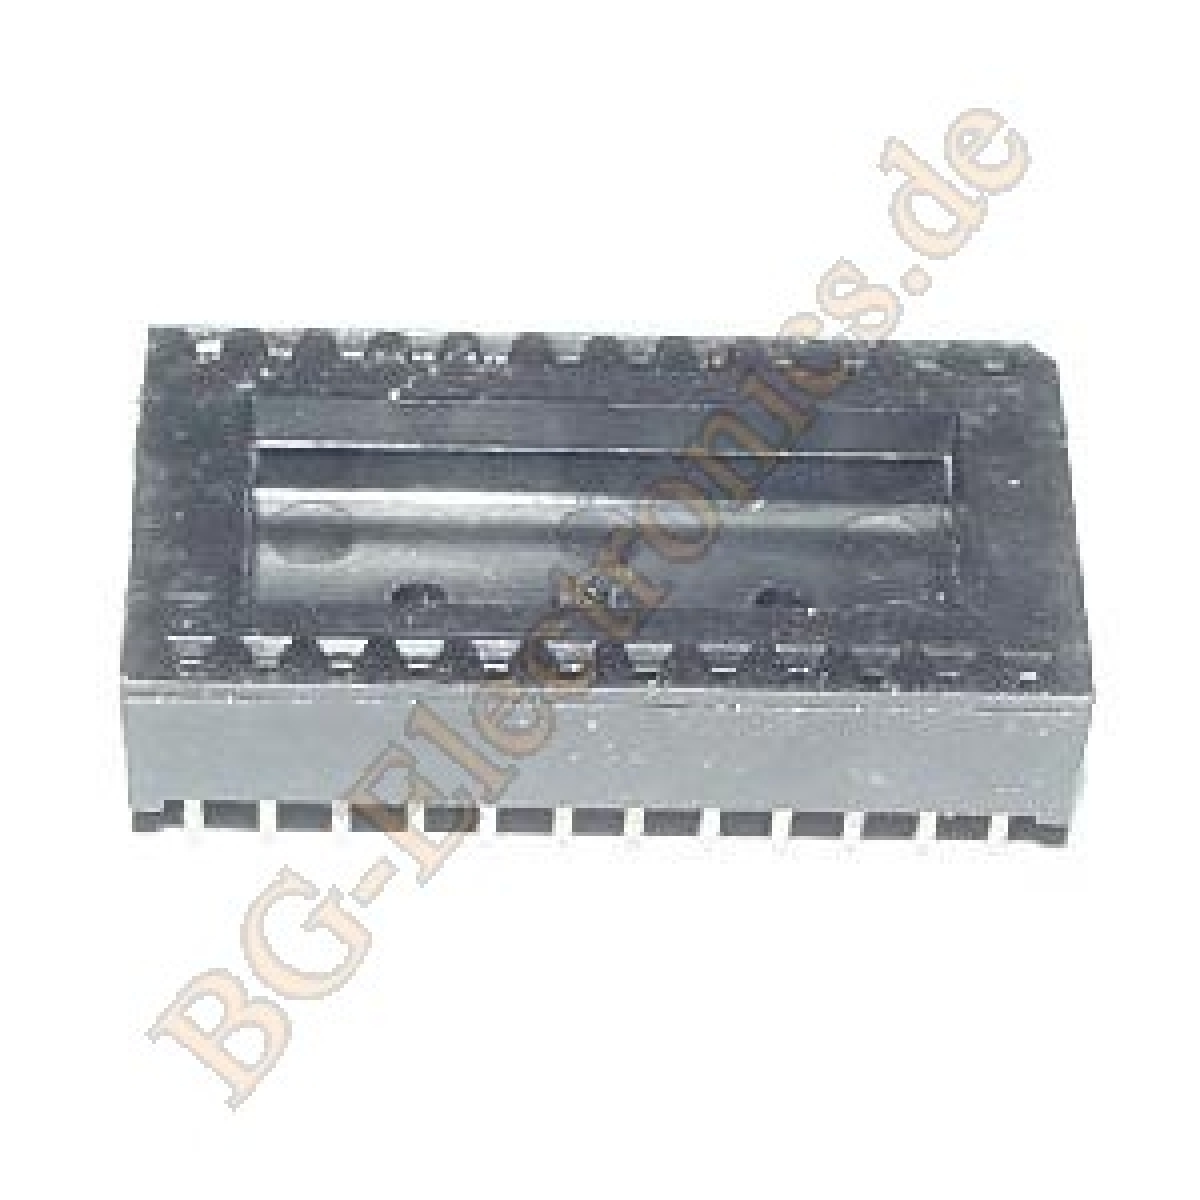 1 x DIP24 C9224-00 24-Pol DIL Socket IC and Component ...